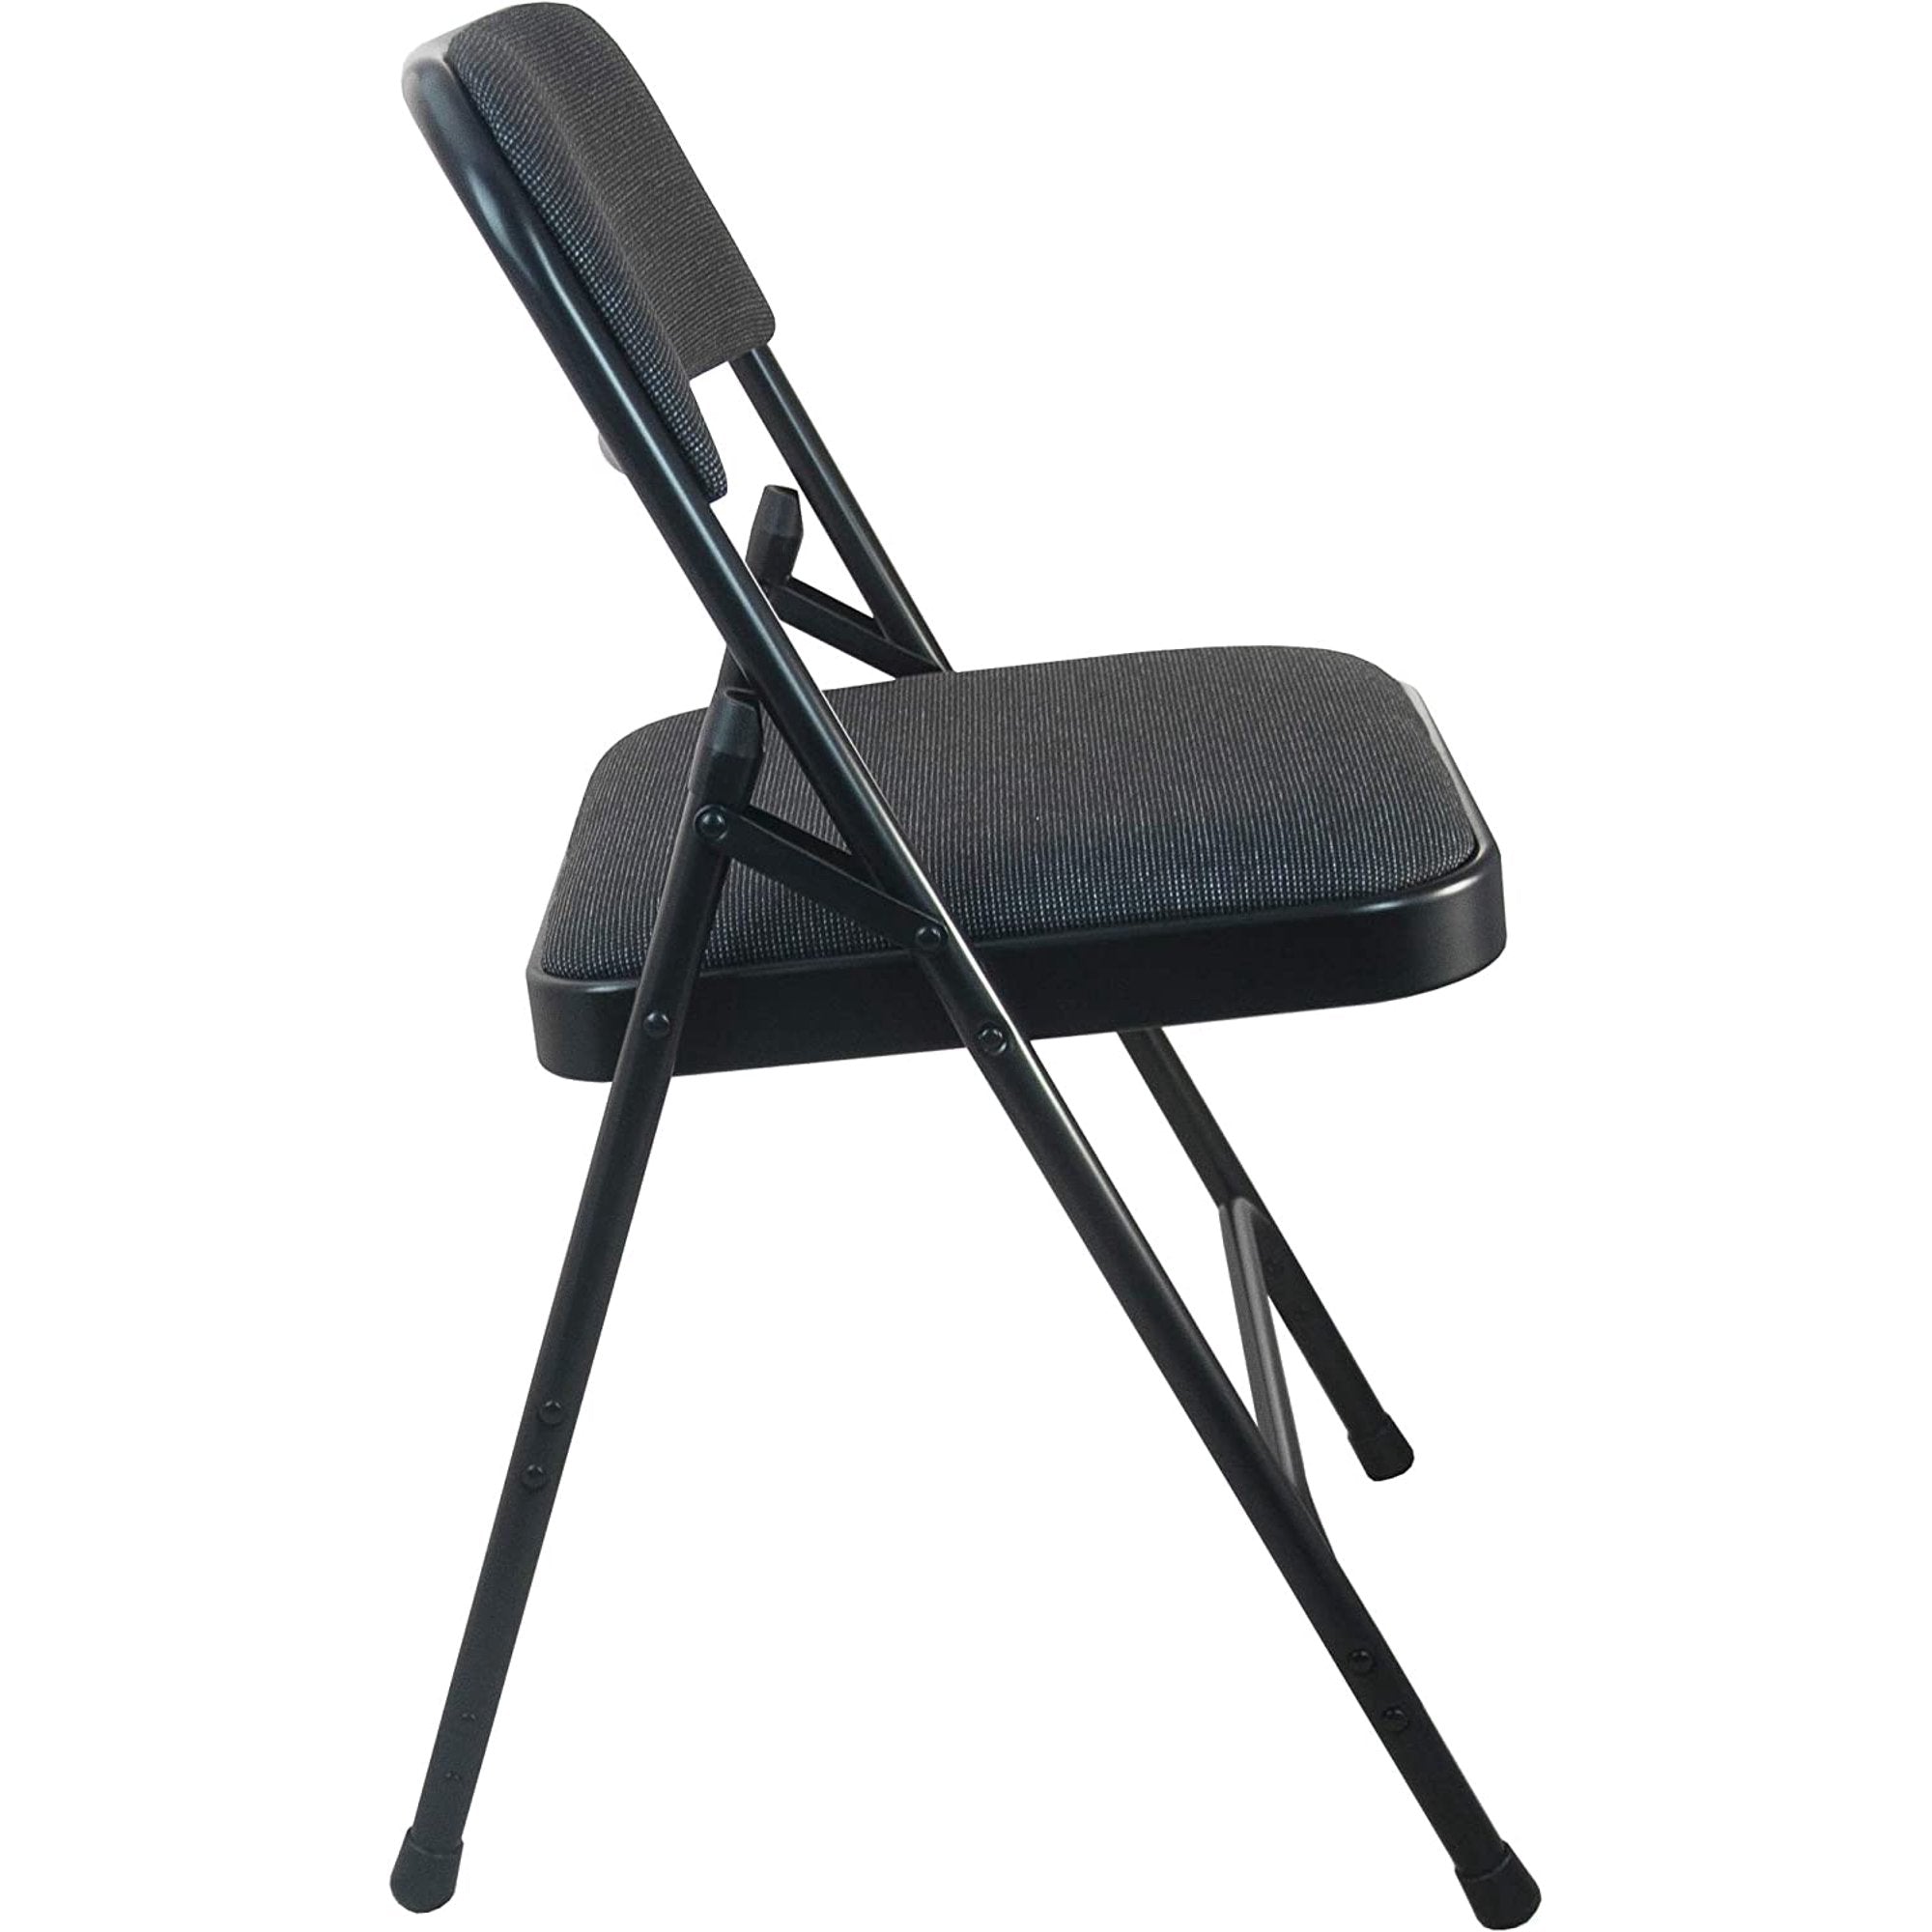 Black Padded Folding Chair with Non-Slip Feet